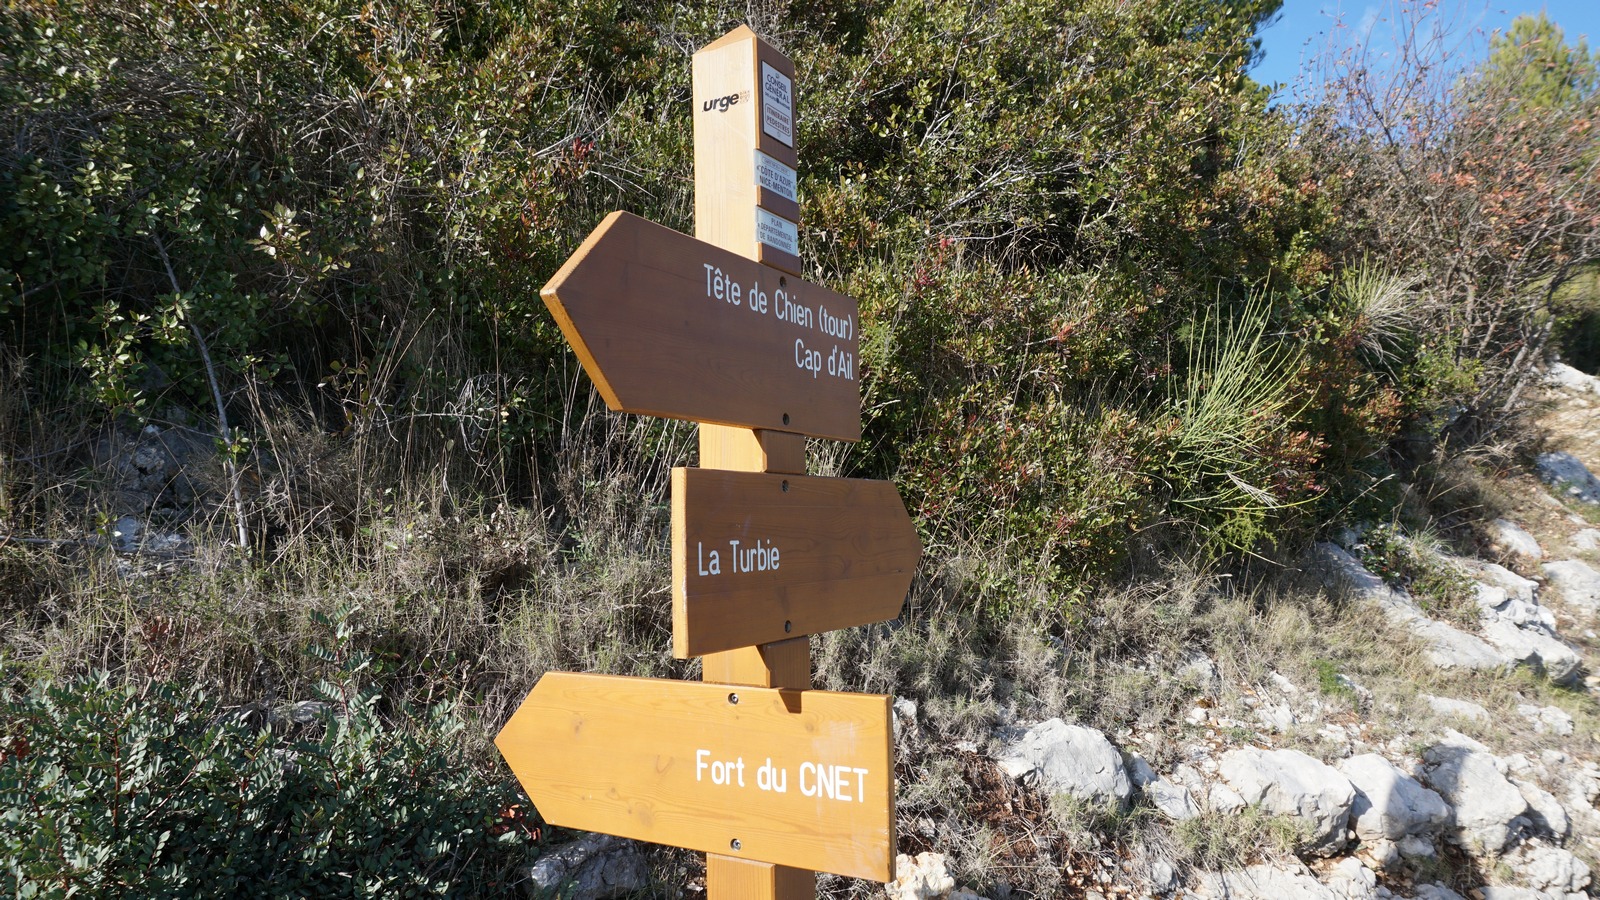 Signpost at the crossroads to Tête de Chien